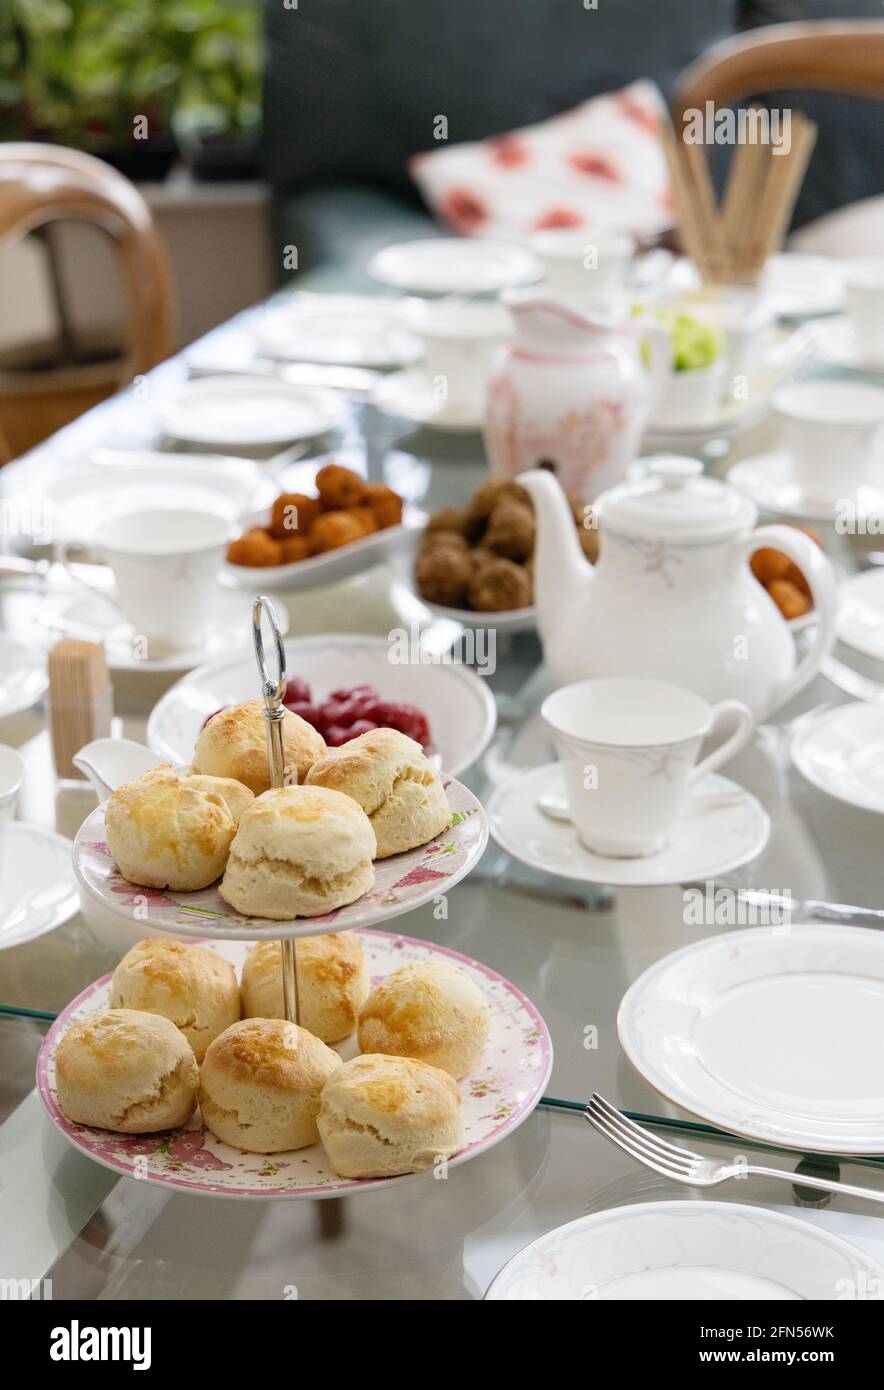 Afternoon tea UK; table set with bone china, scones and tea service for traditional English afternoon tea, Suffolk UK Stock Photo